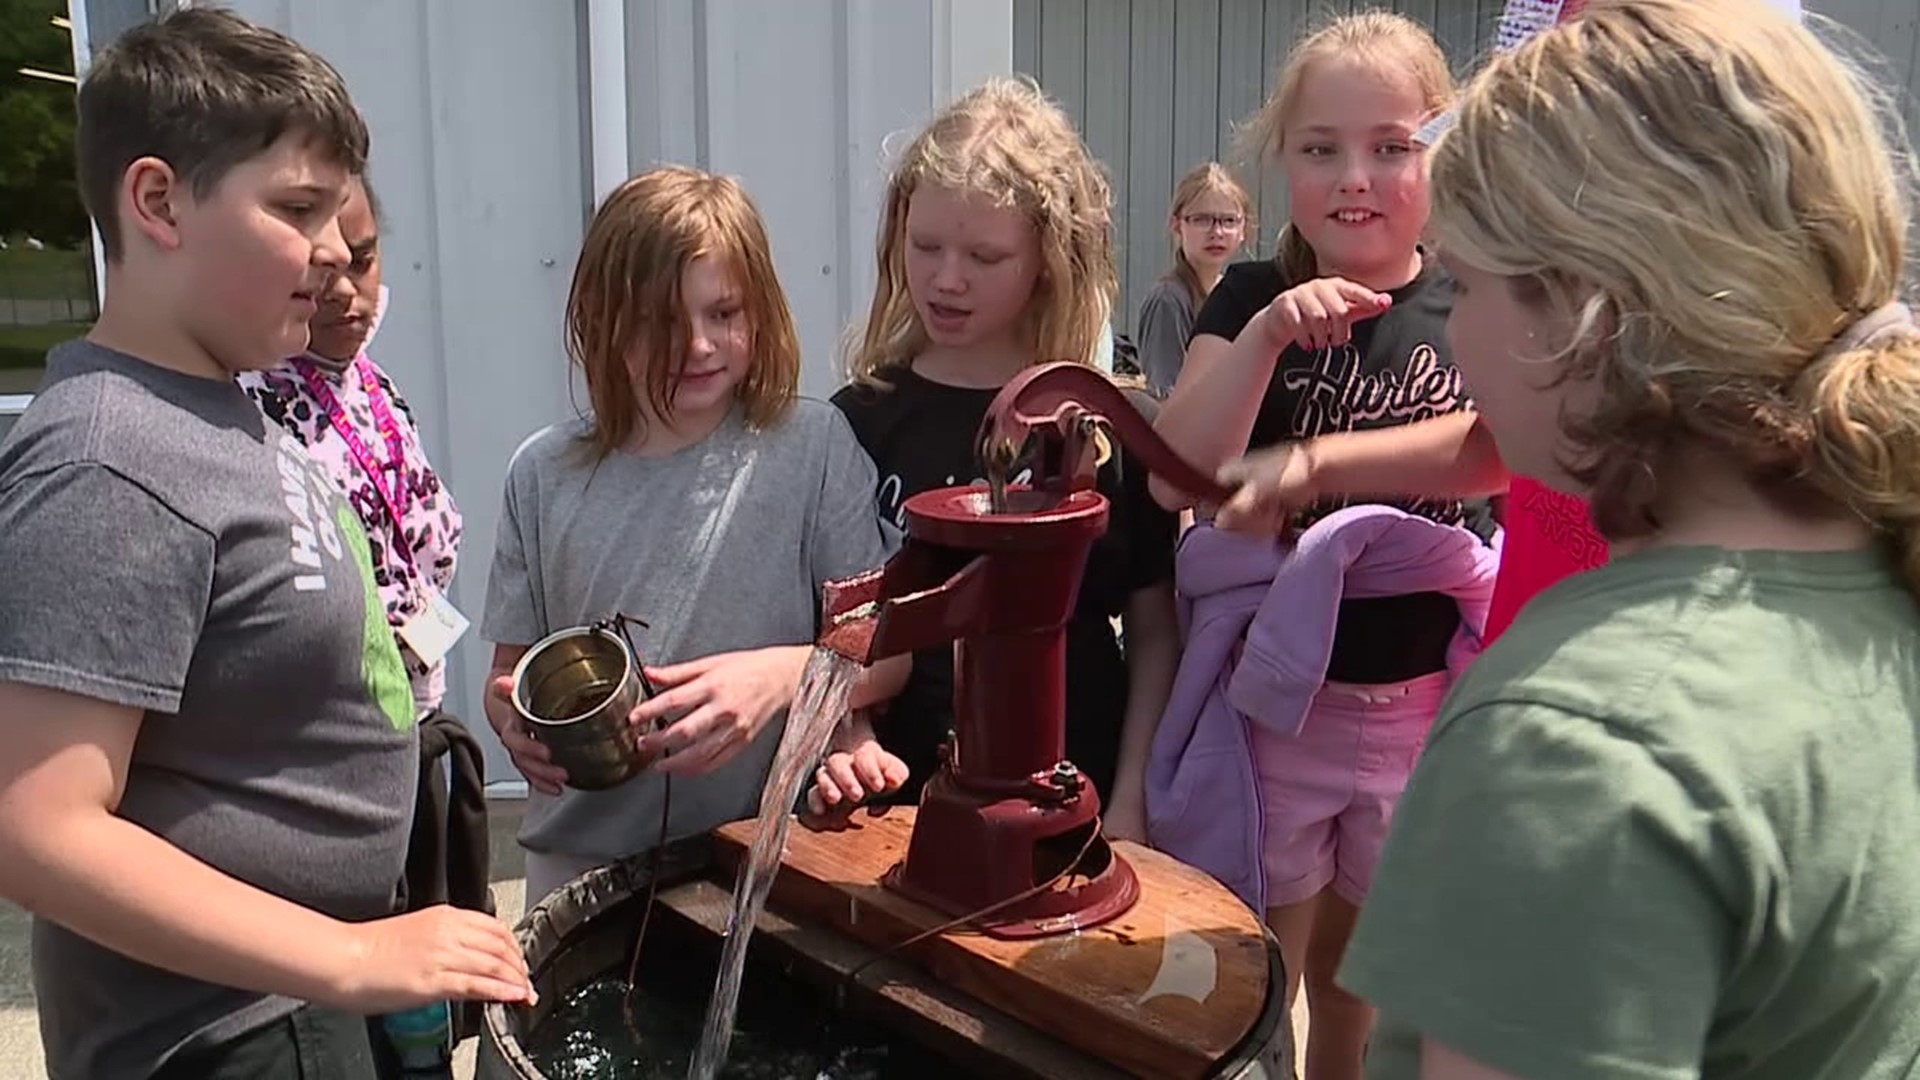 Bradford County Farm Days gave area kids the opportunity to live a day in the life of a young child in the 1860s.